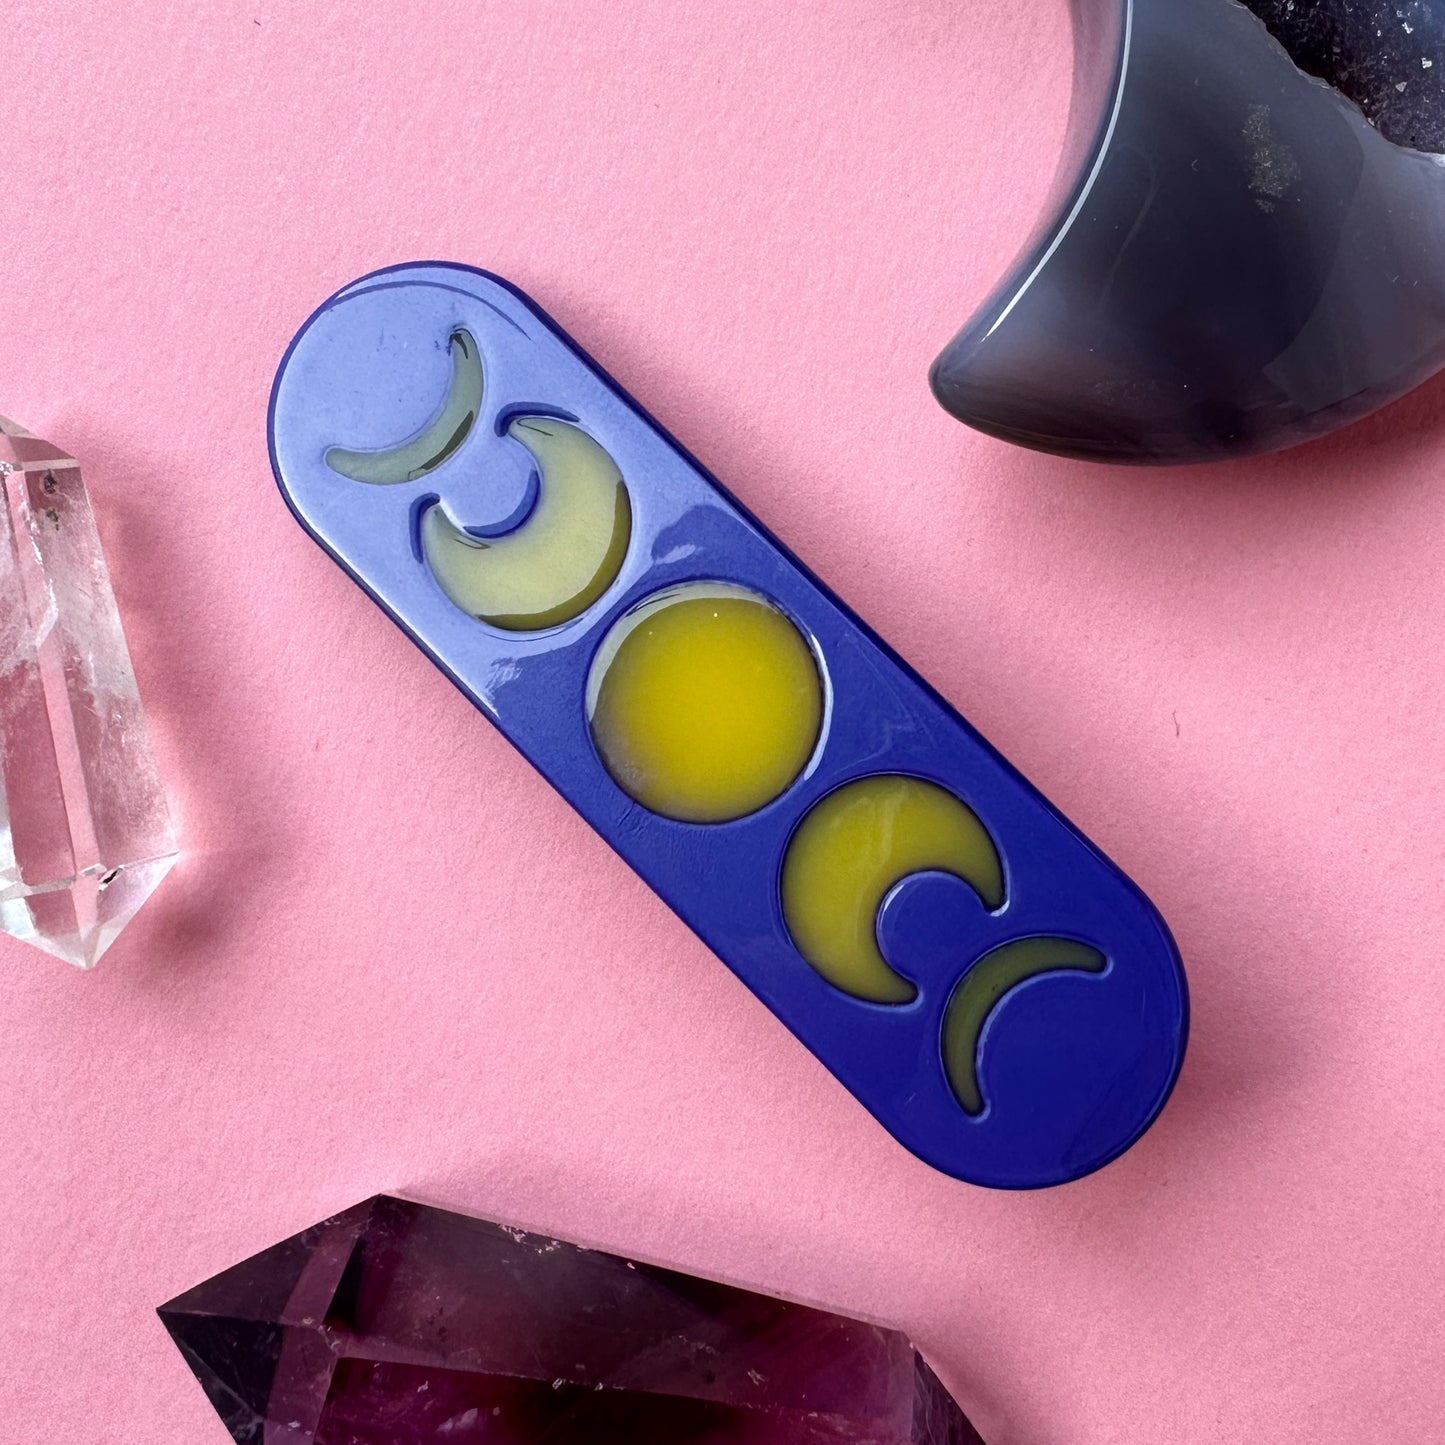 An acetate hair clip that is purple with yellow moon phases on it on a pink background surrounded by crystals.